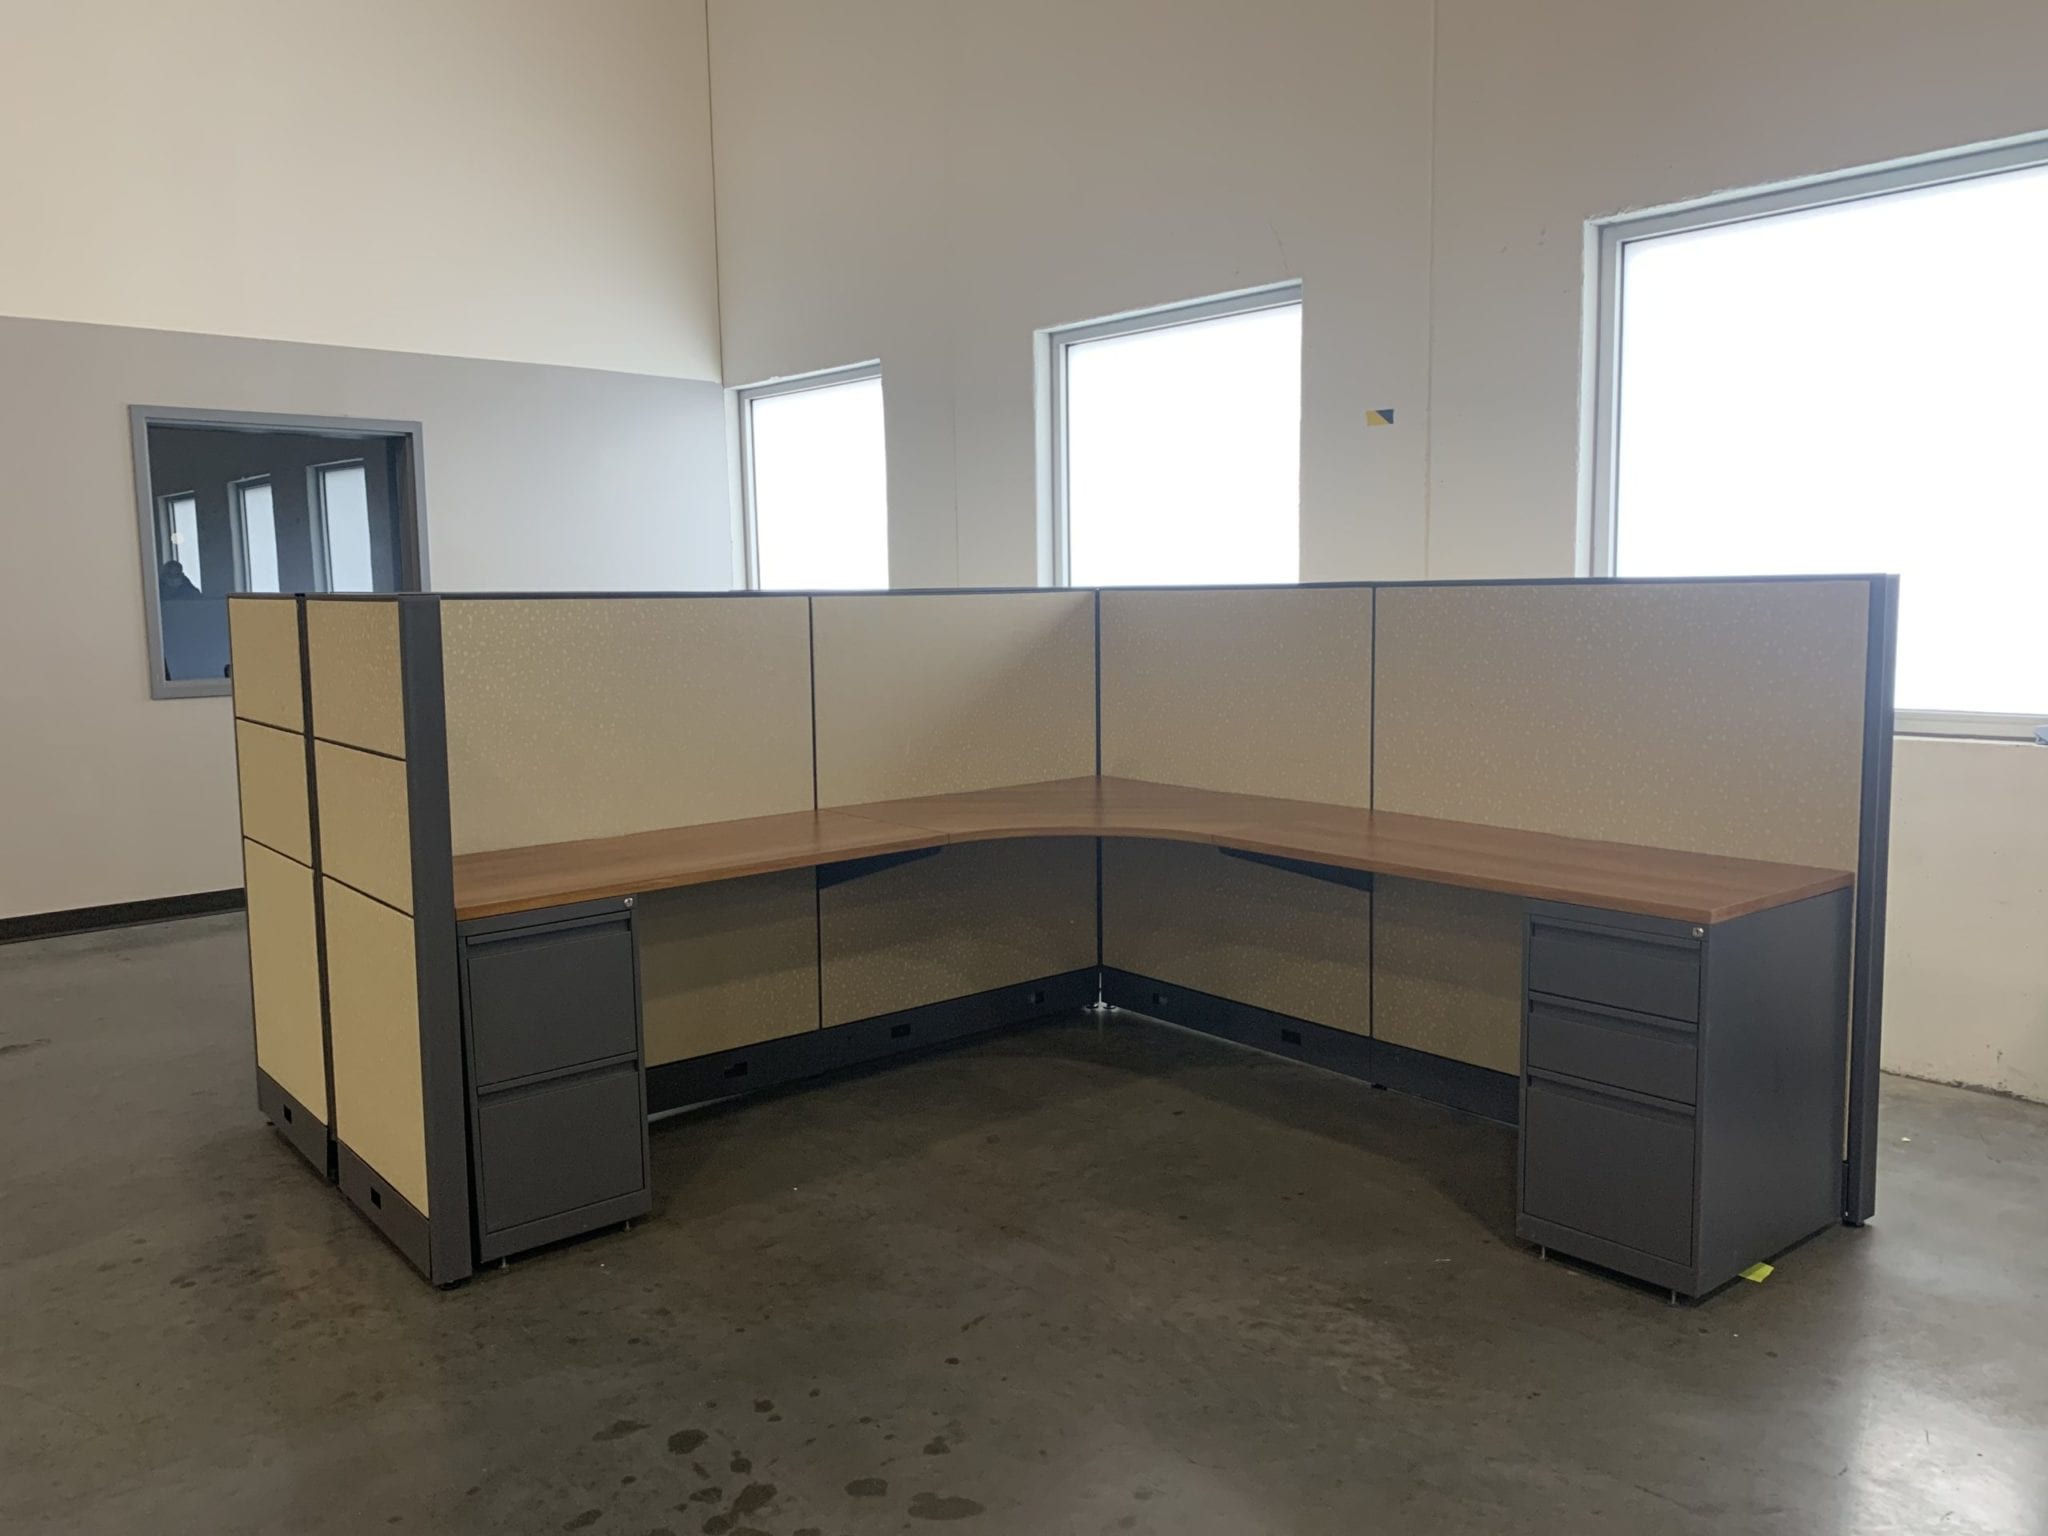 Pre-Owned Office Furniture